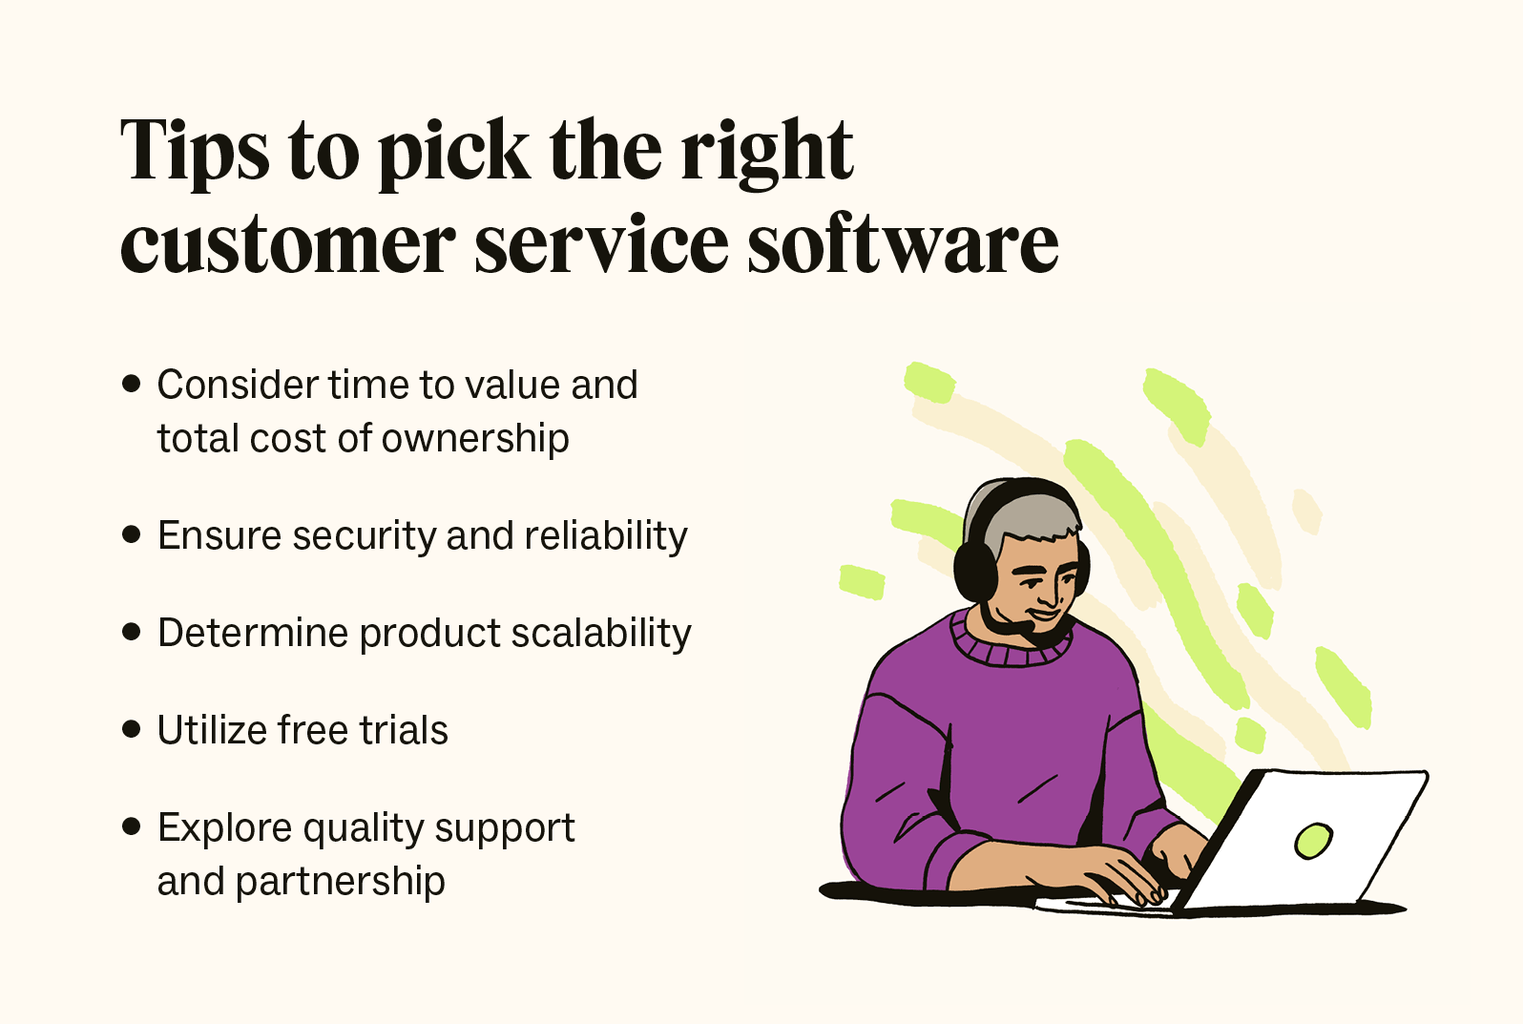 A graphic lists five tips for choosing the right customer service software for your business.